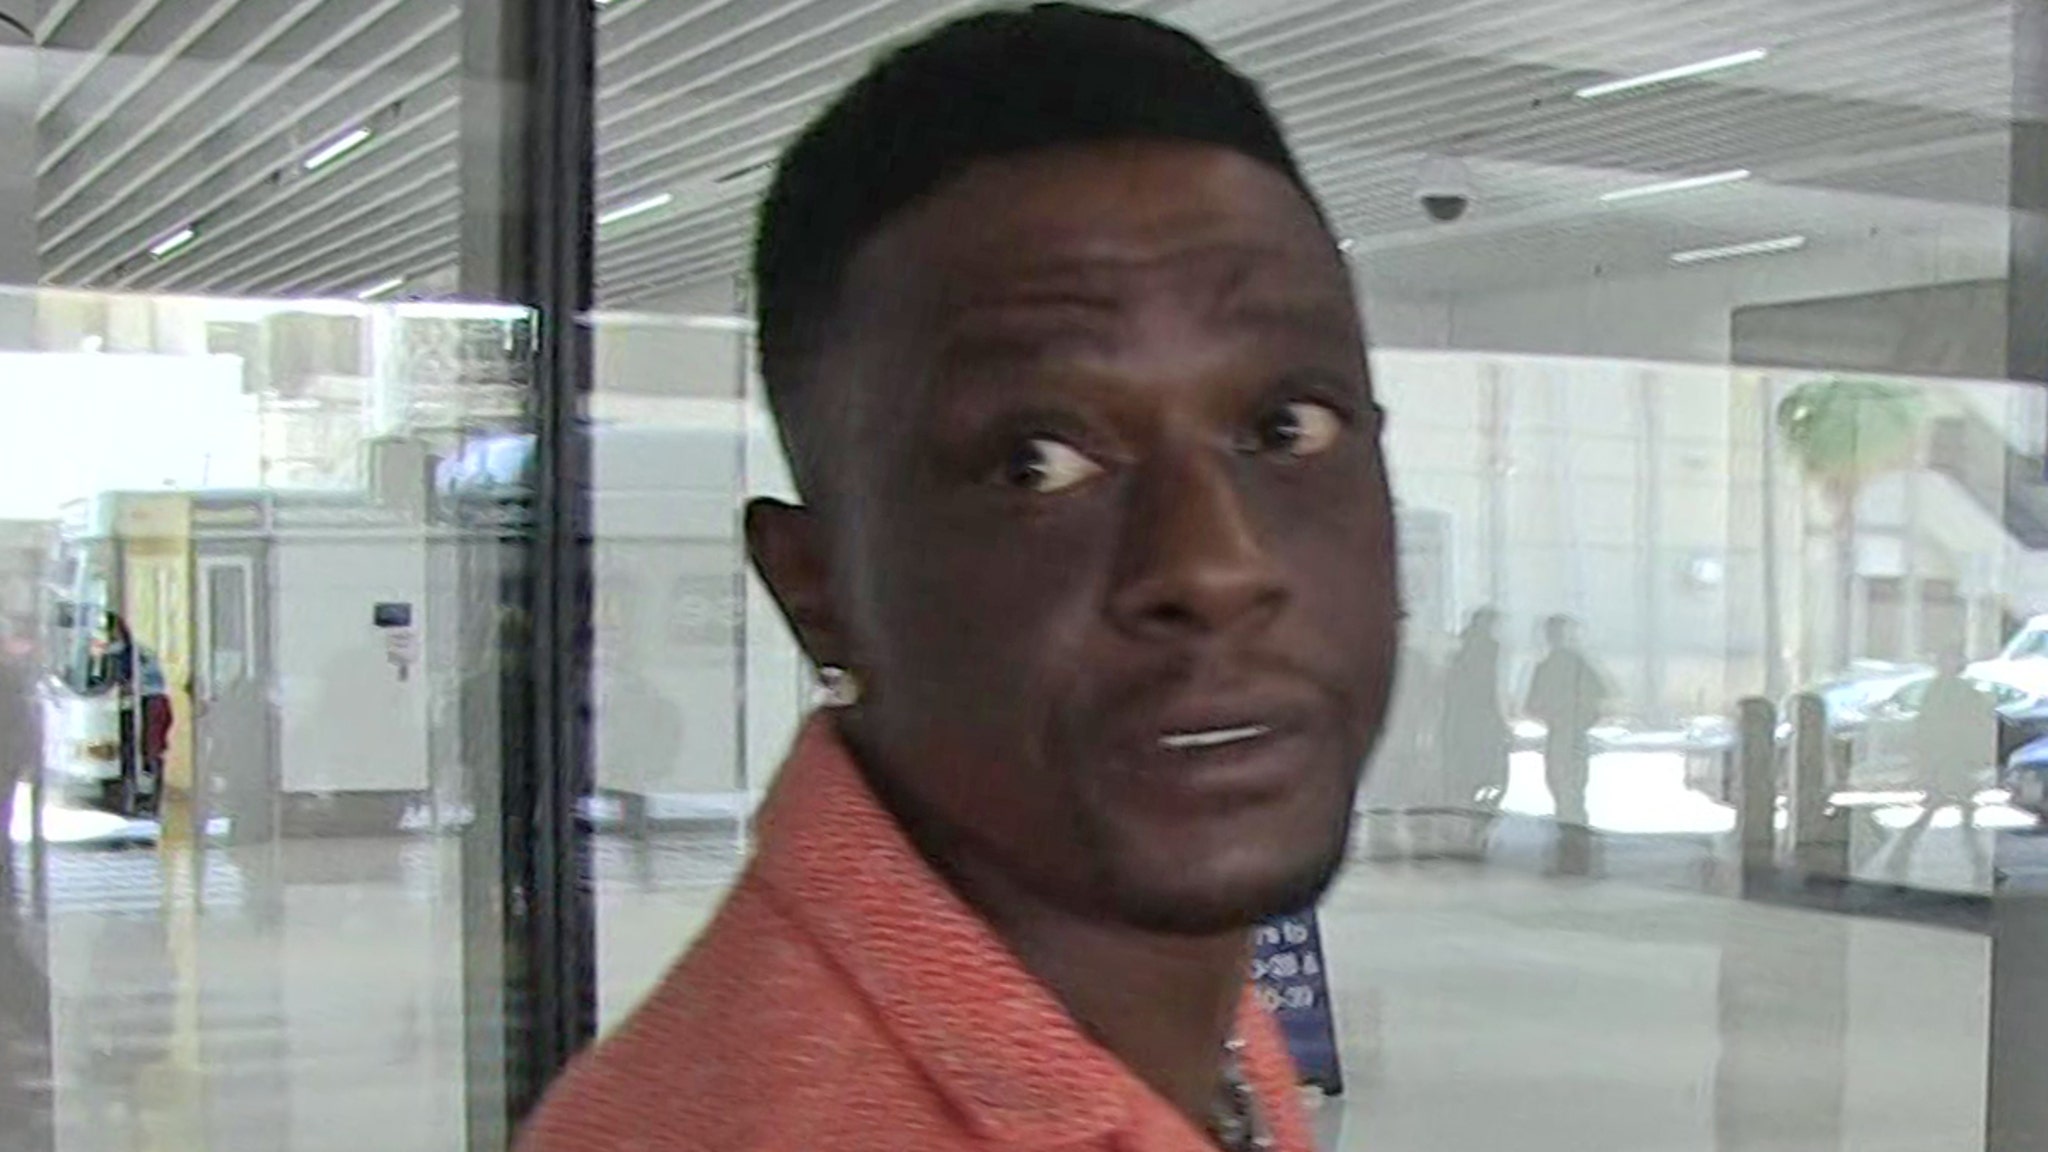 Boosie Badazz Expected to Be Released After Getting $50K Bond in Gun Case